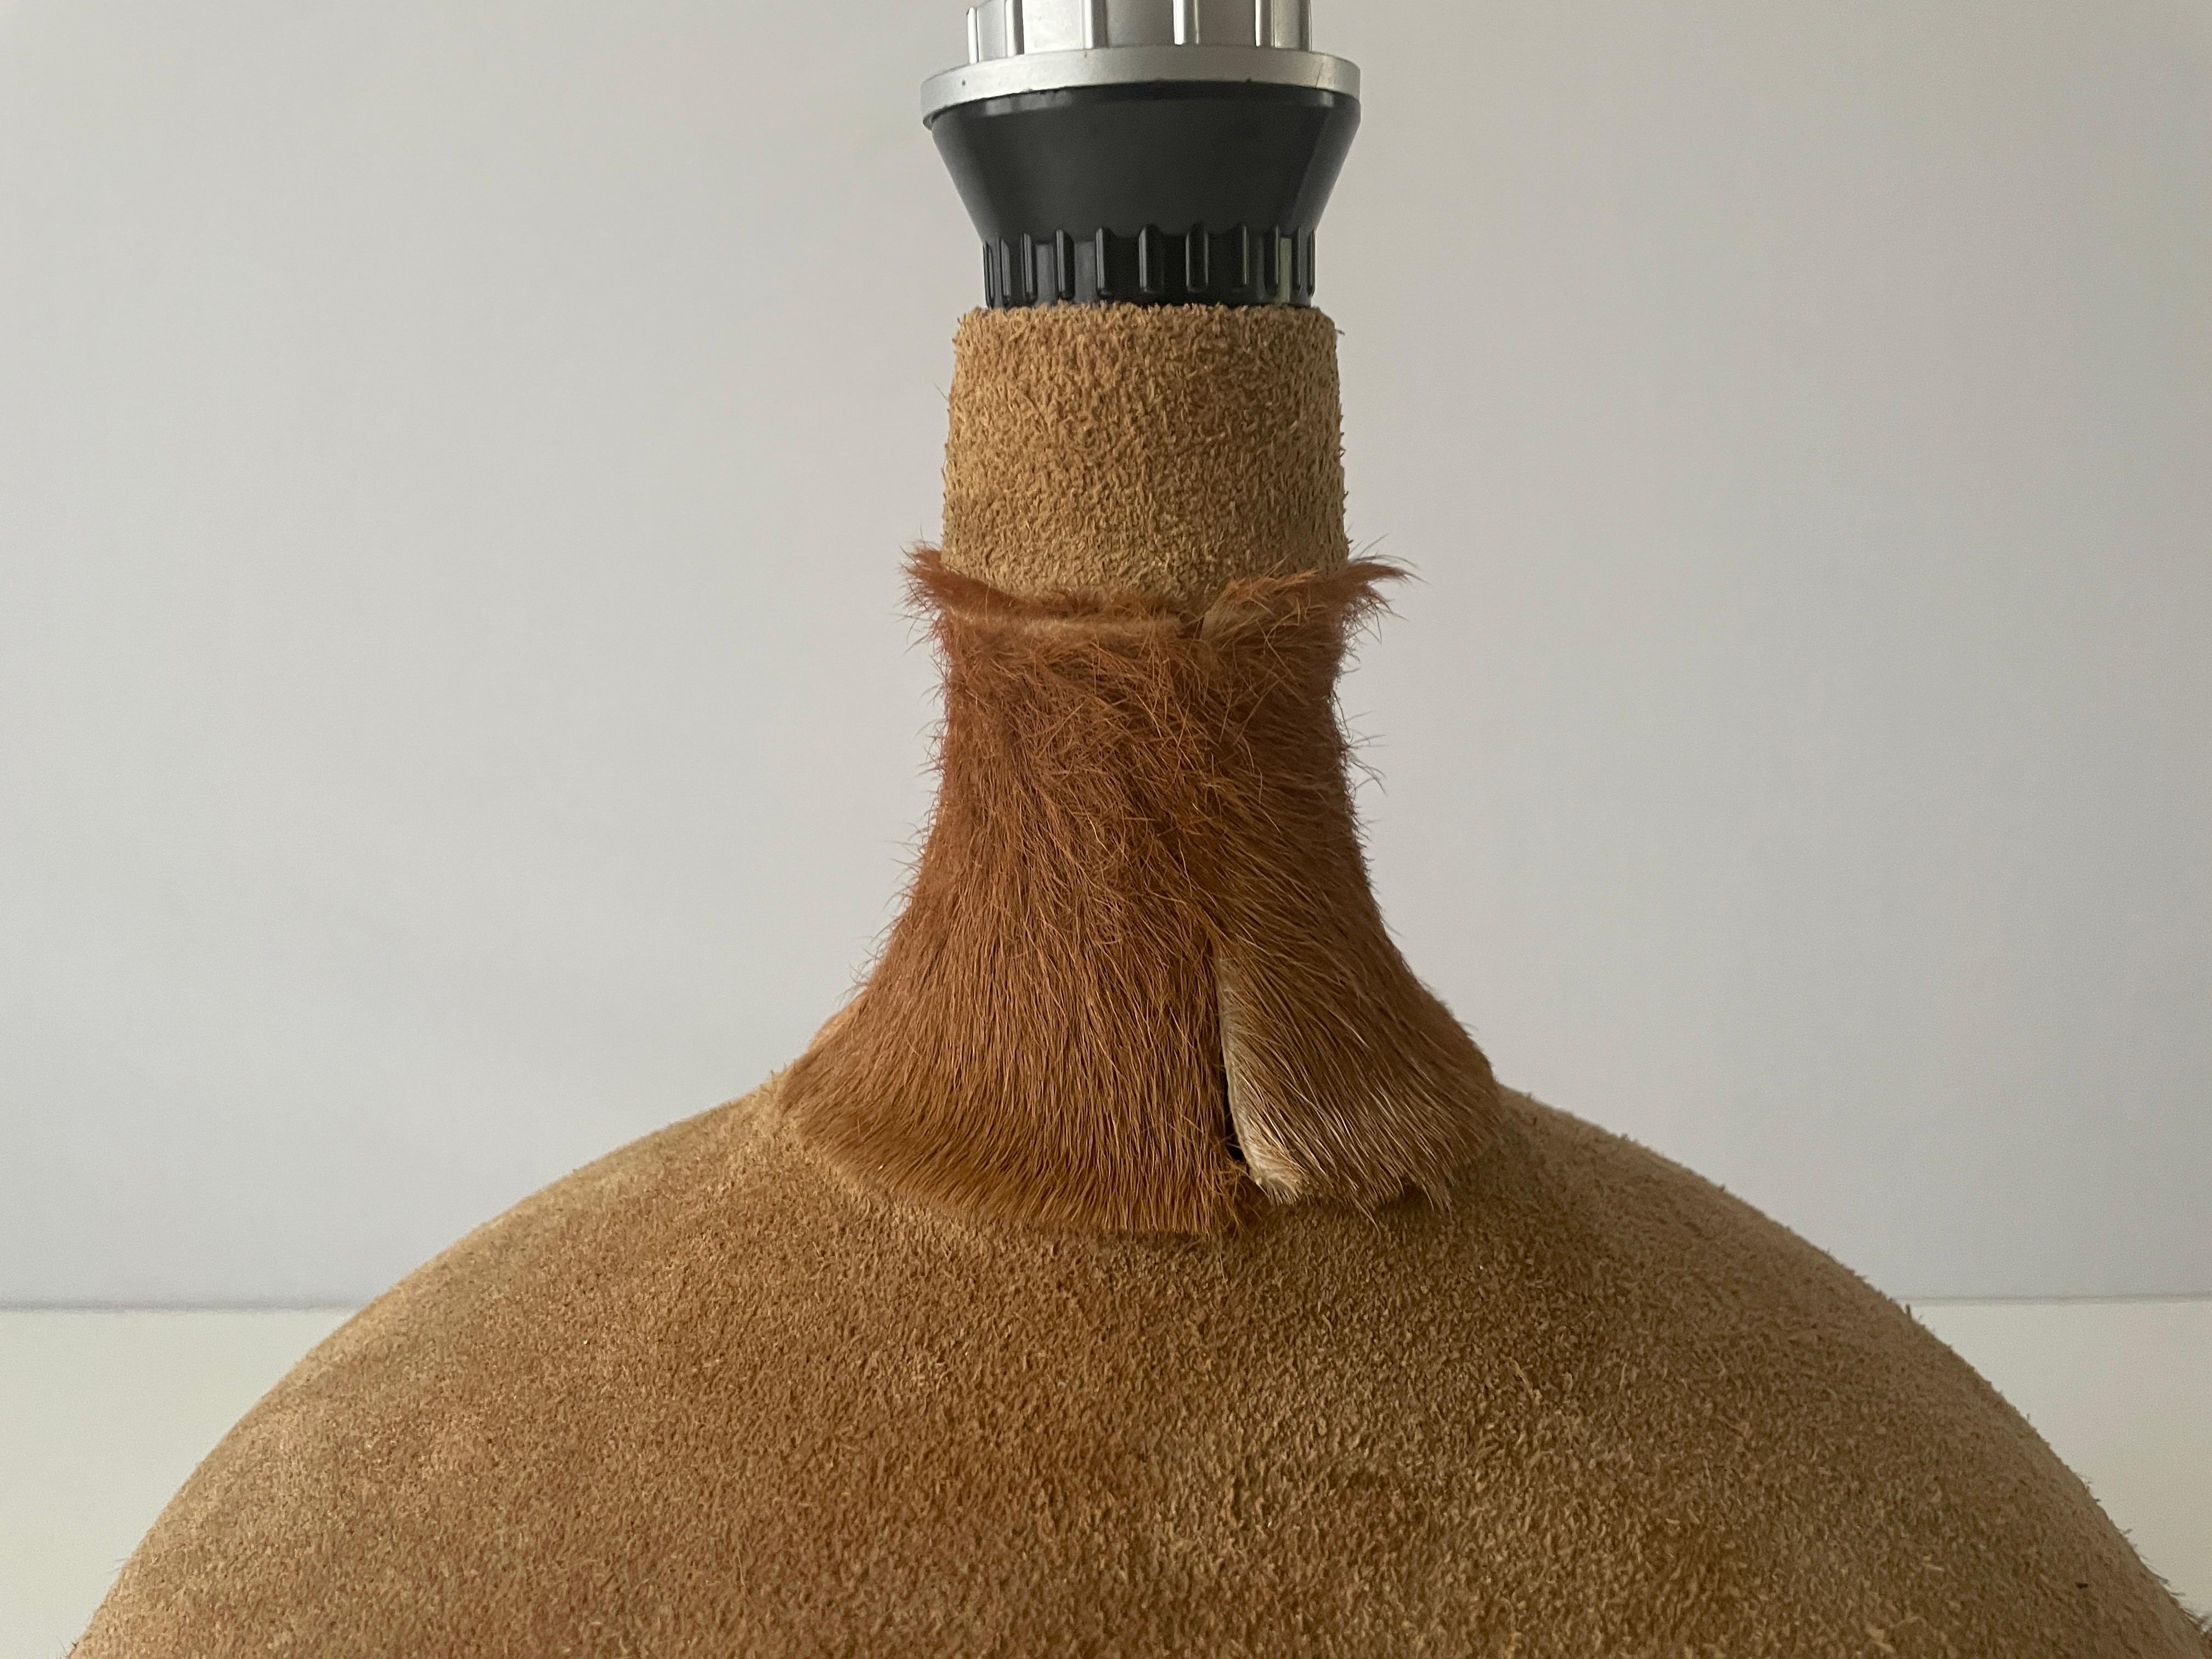 Tan Suede Leather and Glass Shade Floor or Table Lamp, 1960s, Denmark For Sale 1